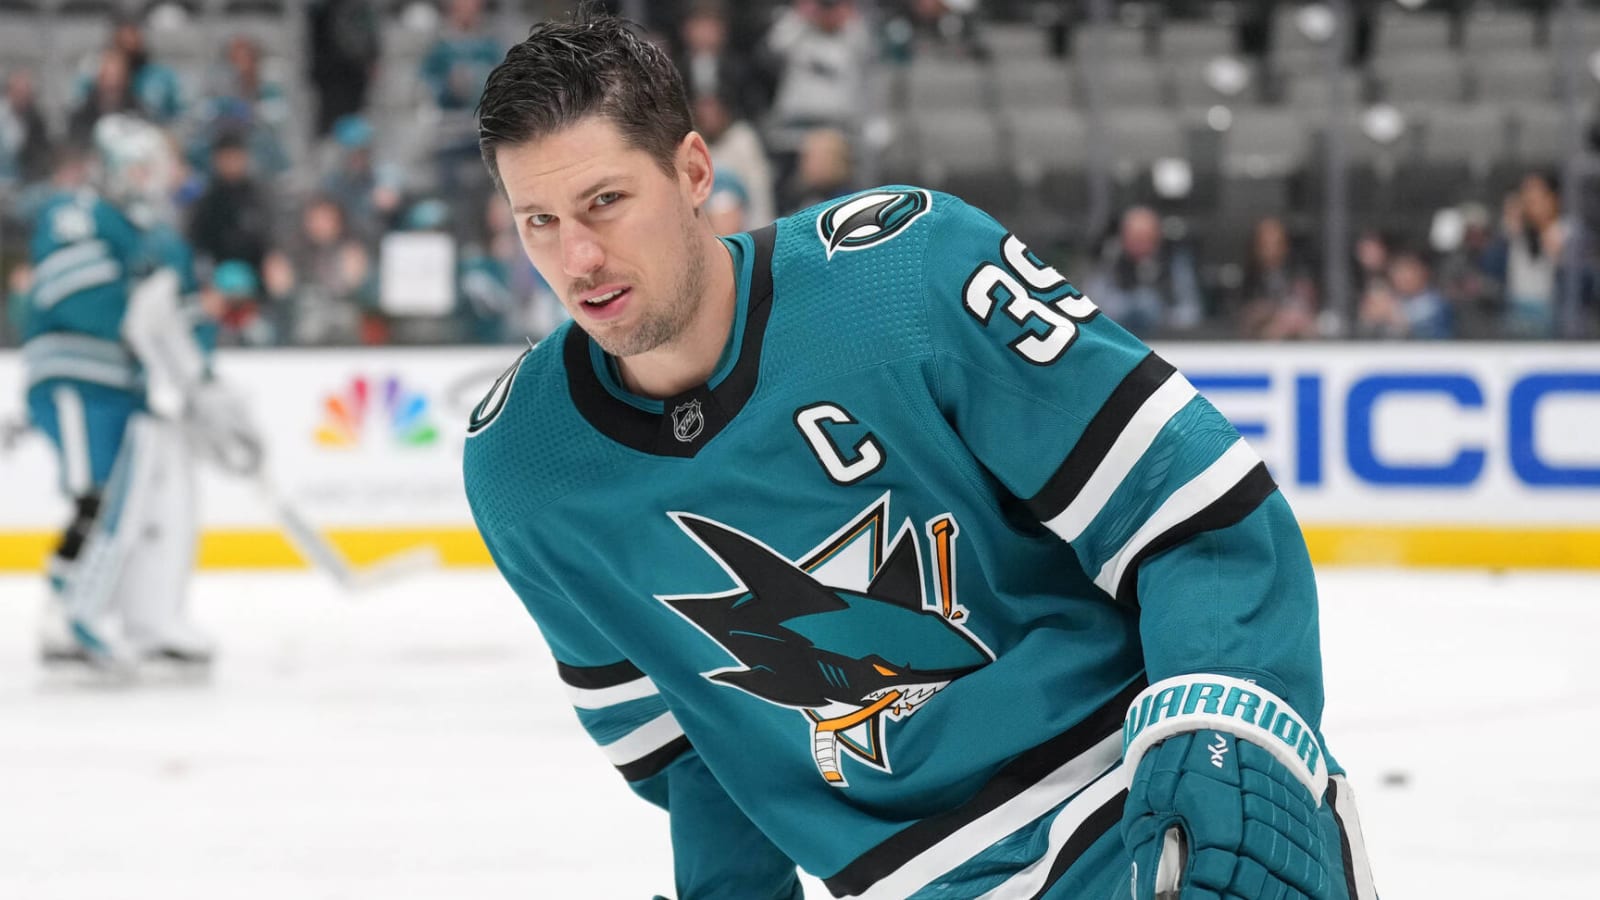 Logan Couture and Nico Sturm to Return for Sharks